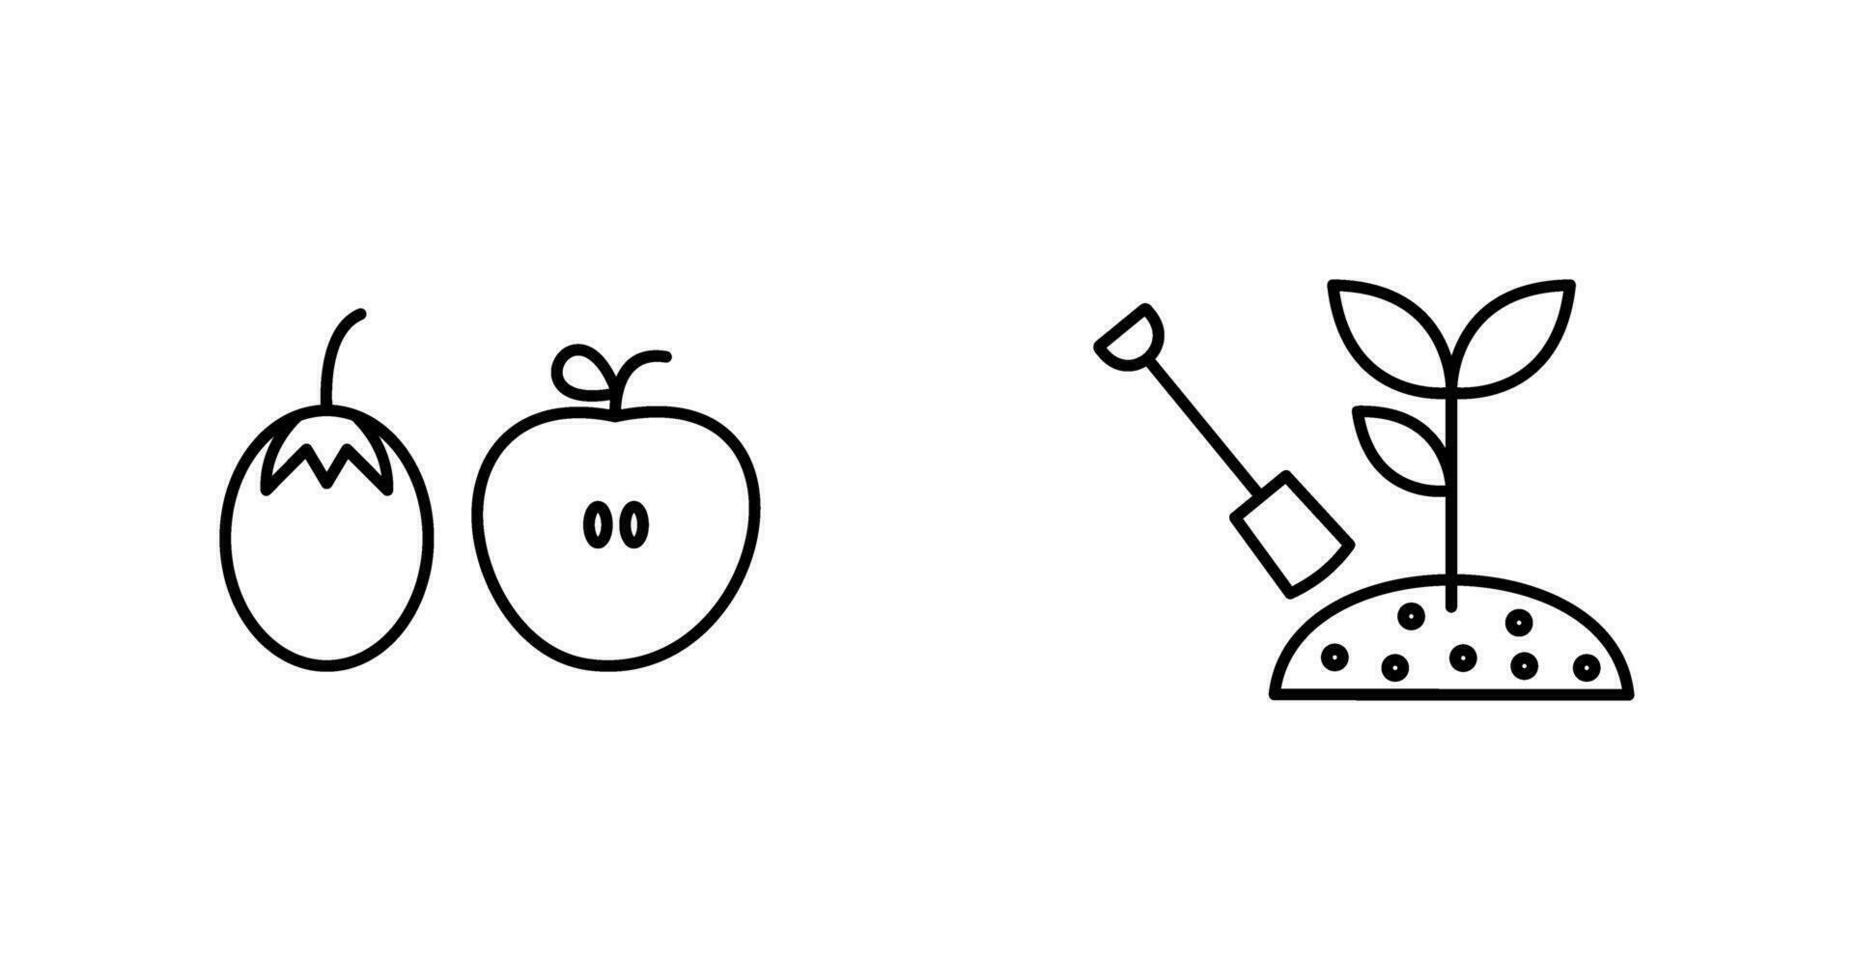 Fruits and Vegetables and Plantation Icon vector